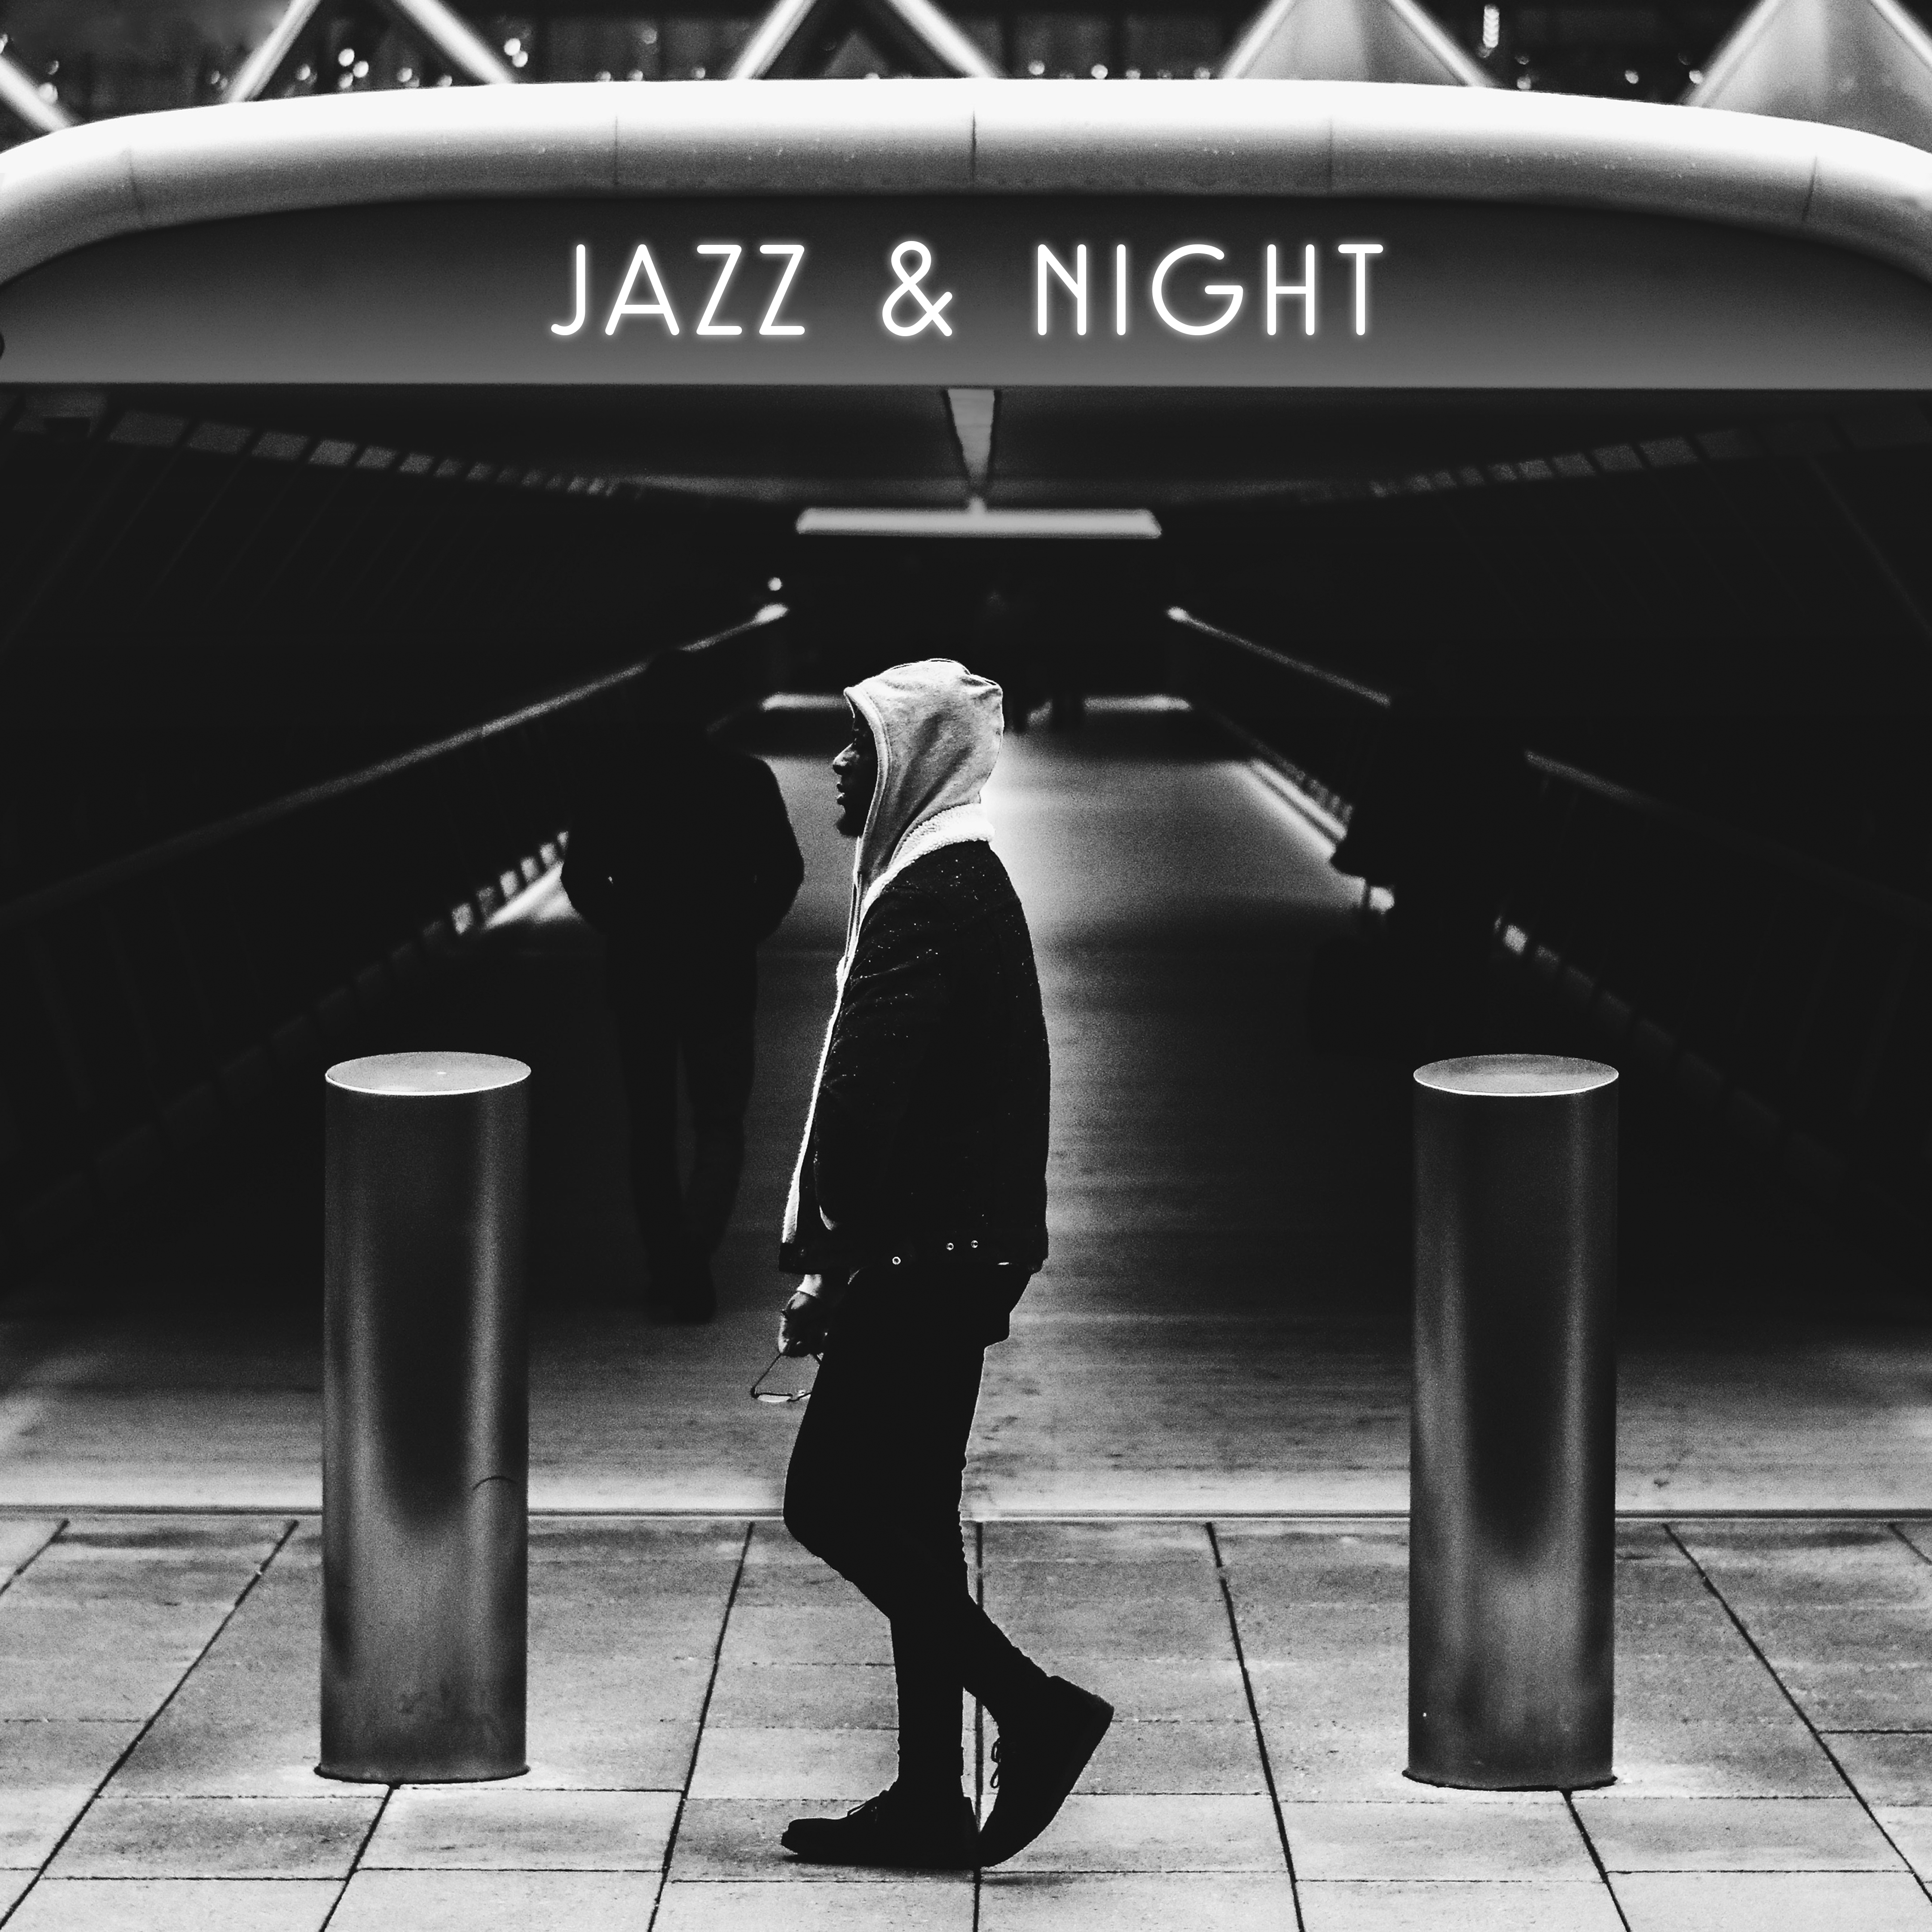 Jazz & Night – Relaxation Sounds, Deep Relax, Jazz Guitar, Calm Piano Music, Instrumental Songs at Night